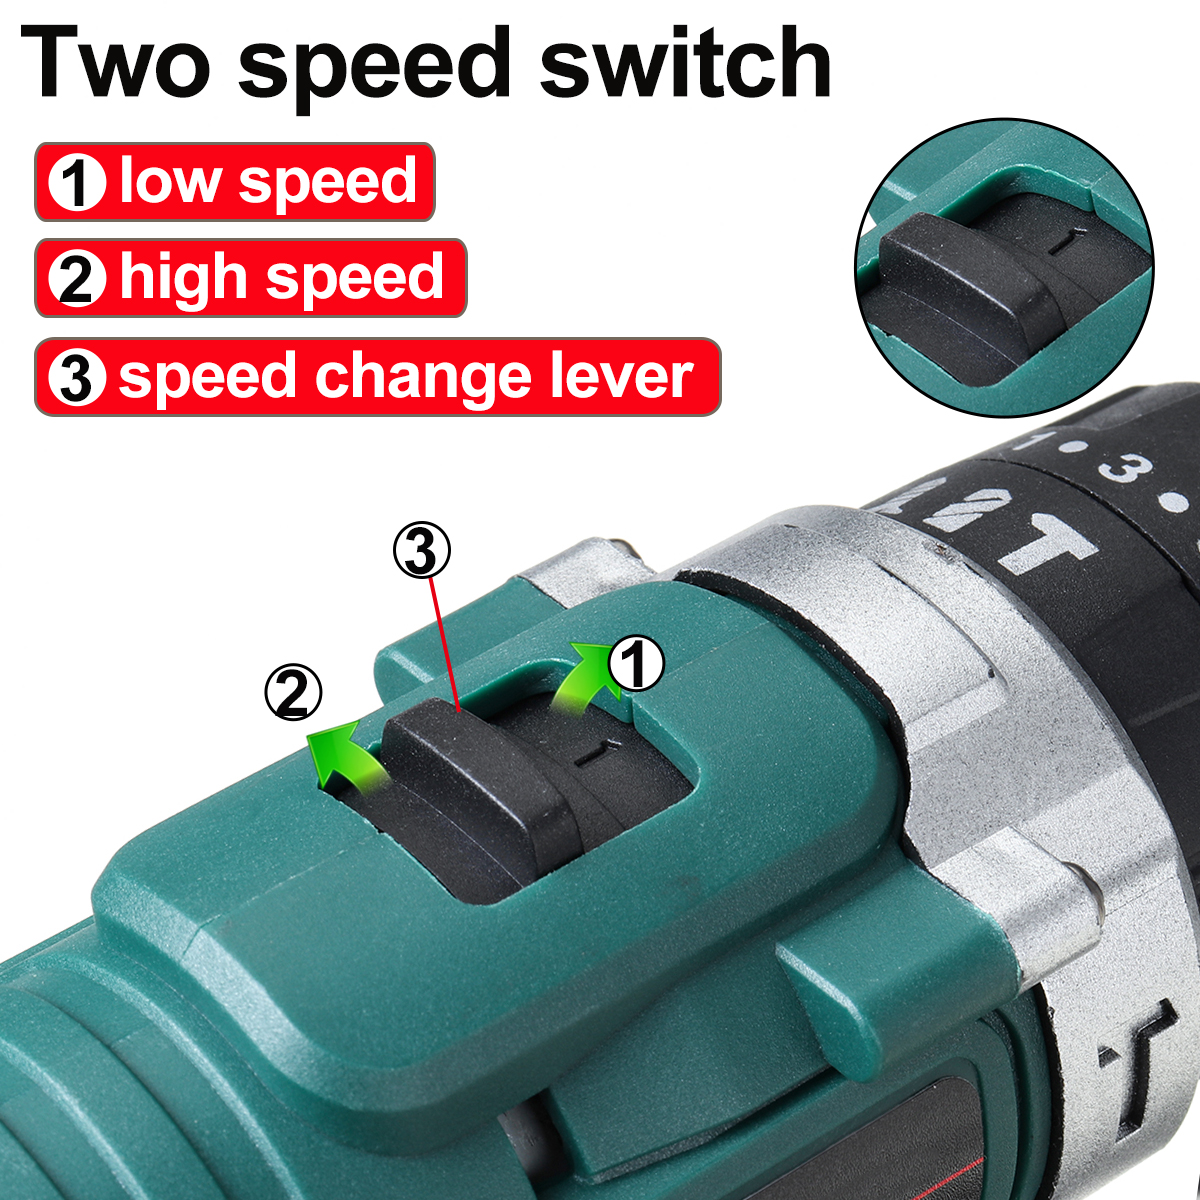 Cordless-Impact-Drill-Driver-HighLow-253-Gears-Speed-2-Battery-Set-1662831-5